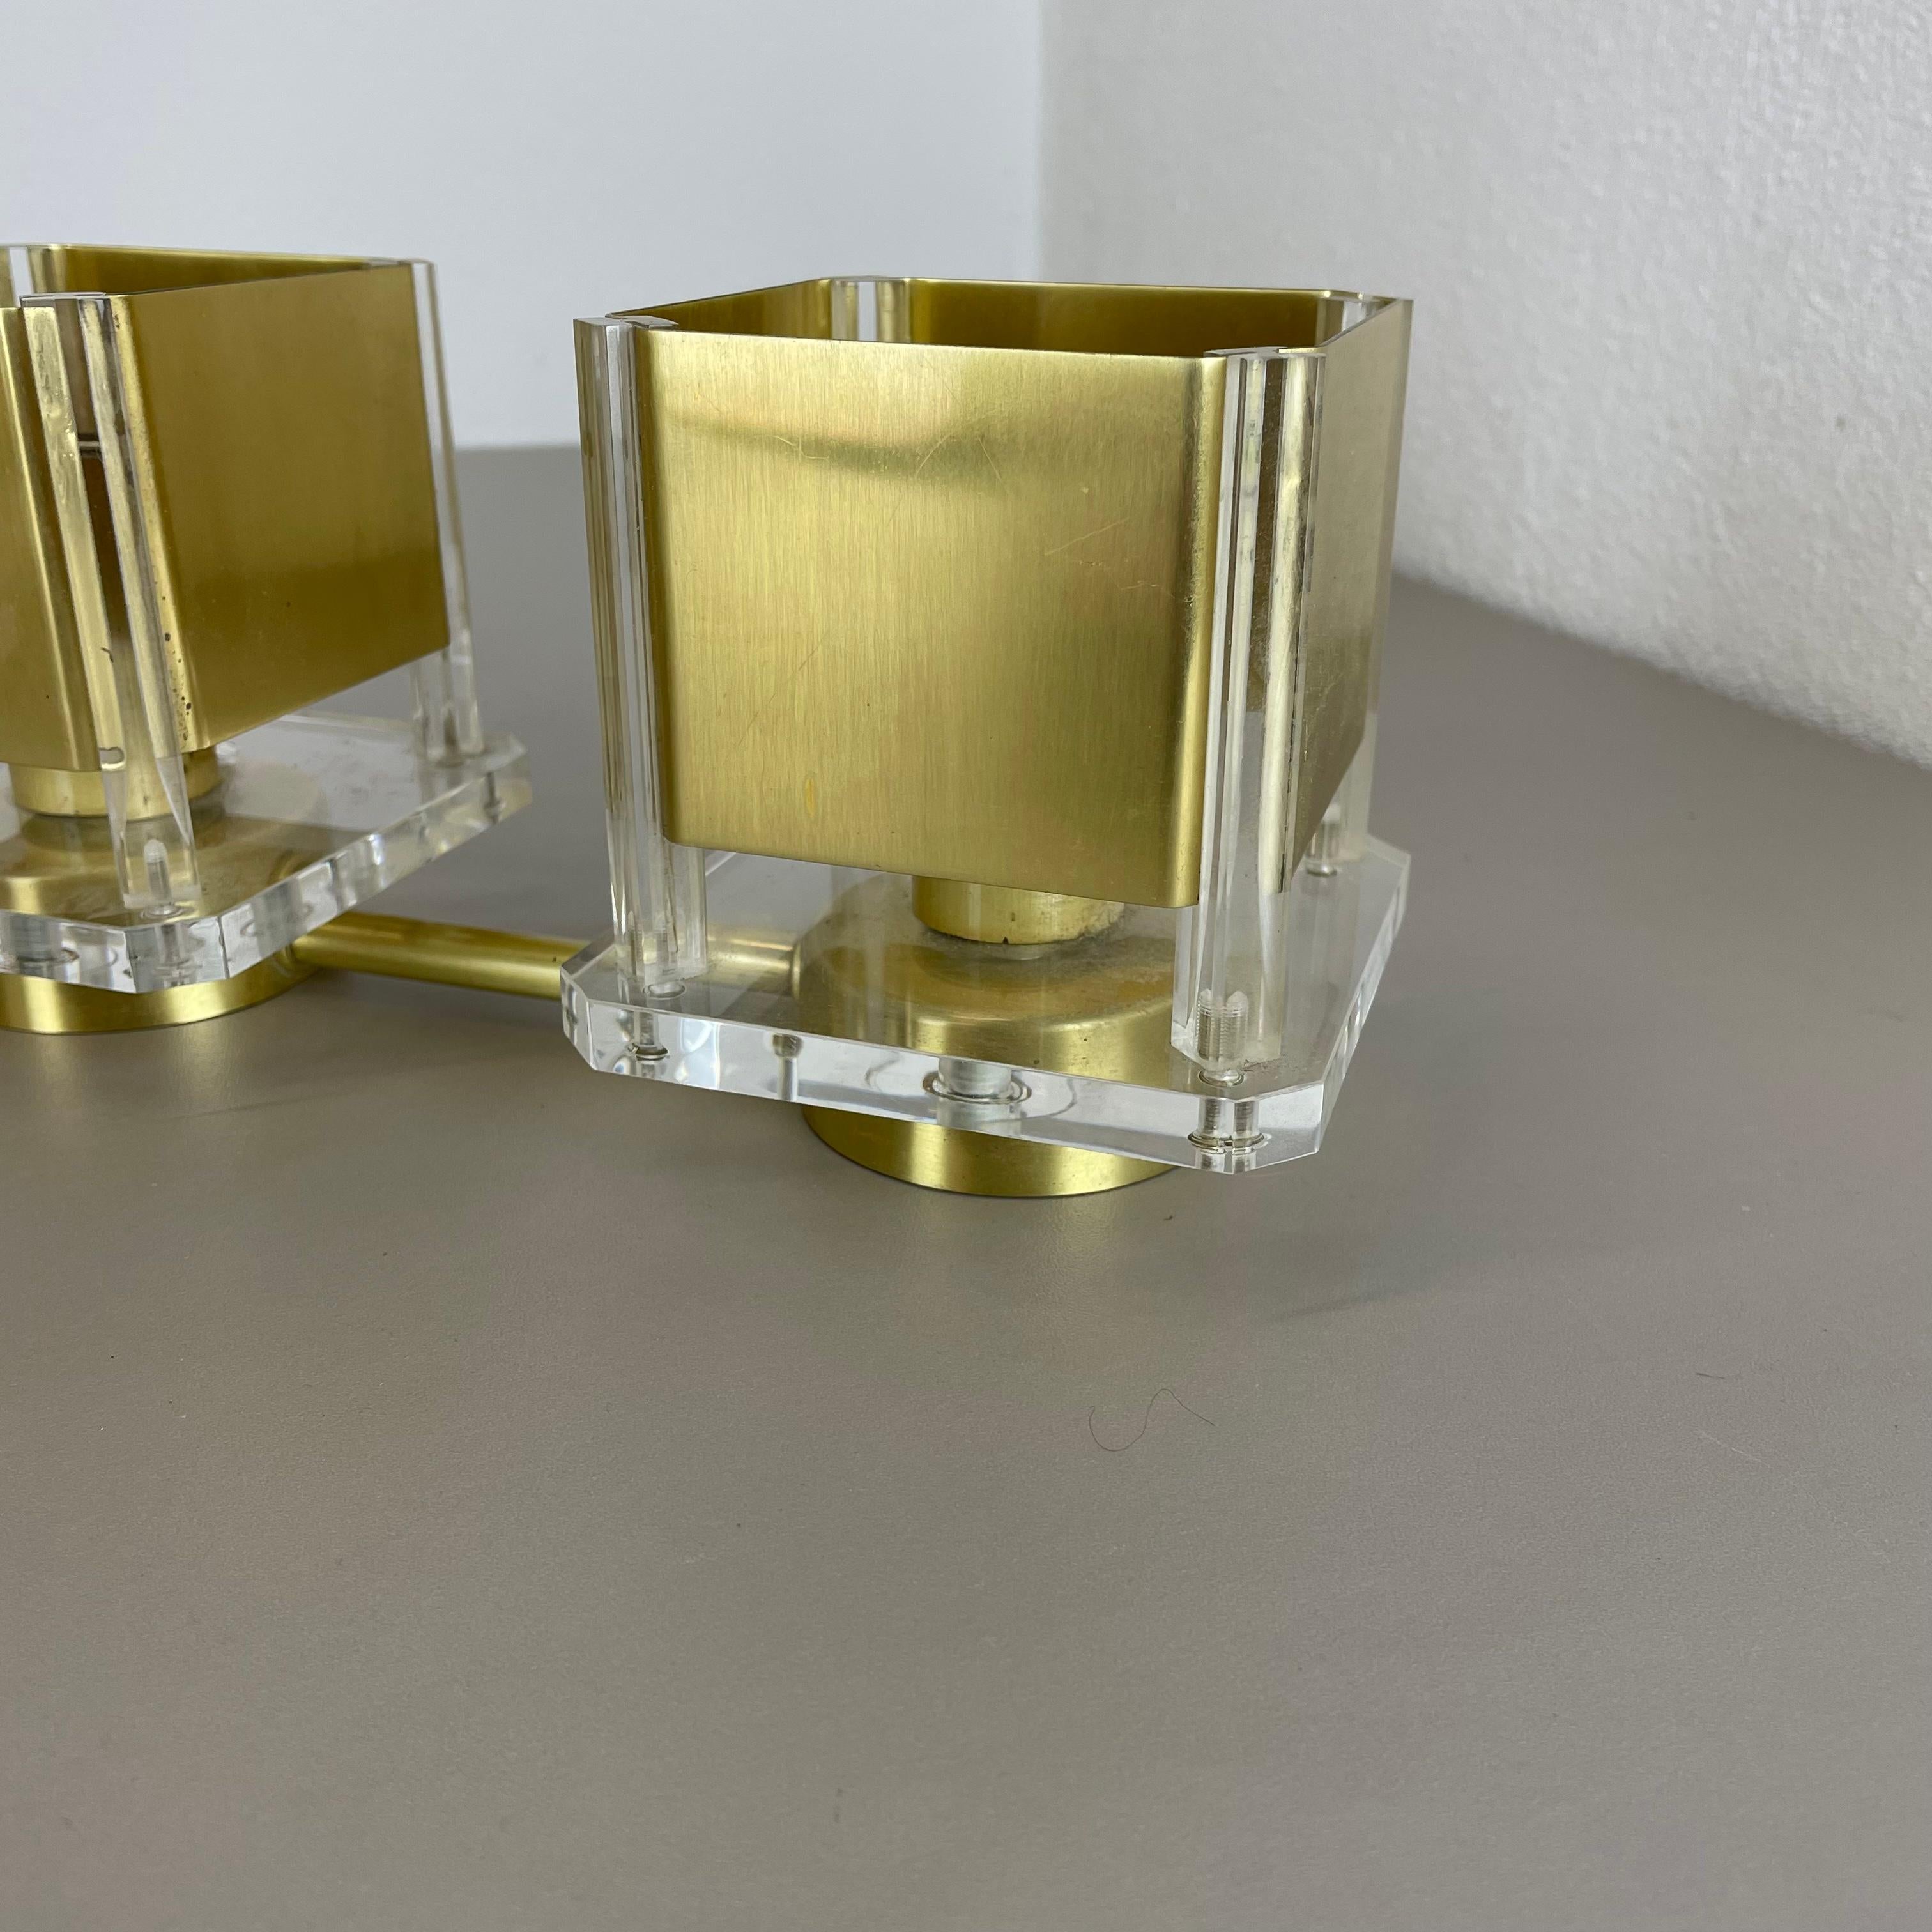 Set of 2 Brass + Acryl Glass Cubic Stilnovo Style Wall Light Sconces, Italy 1970 For Sale 6